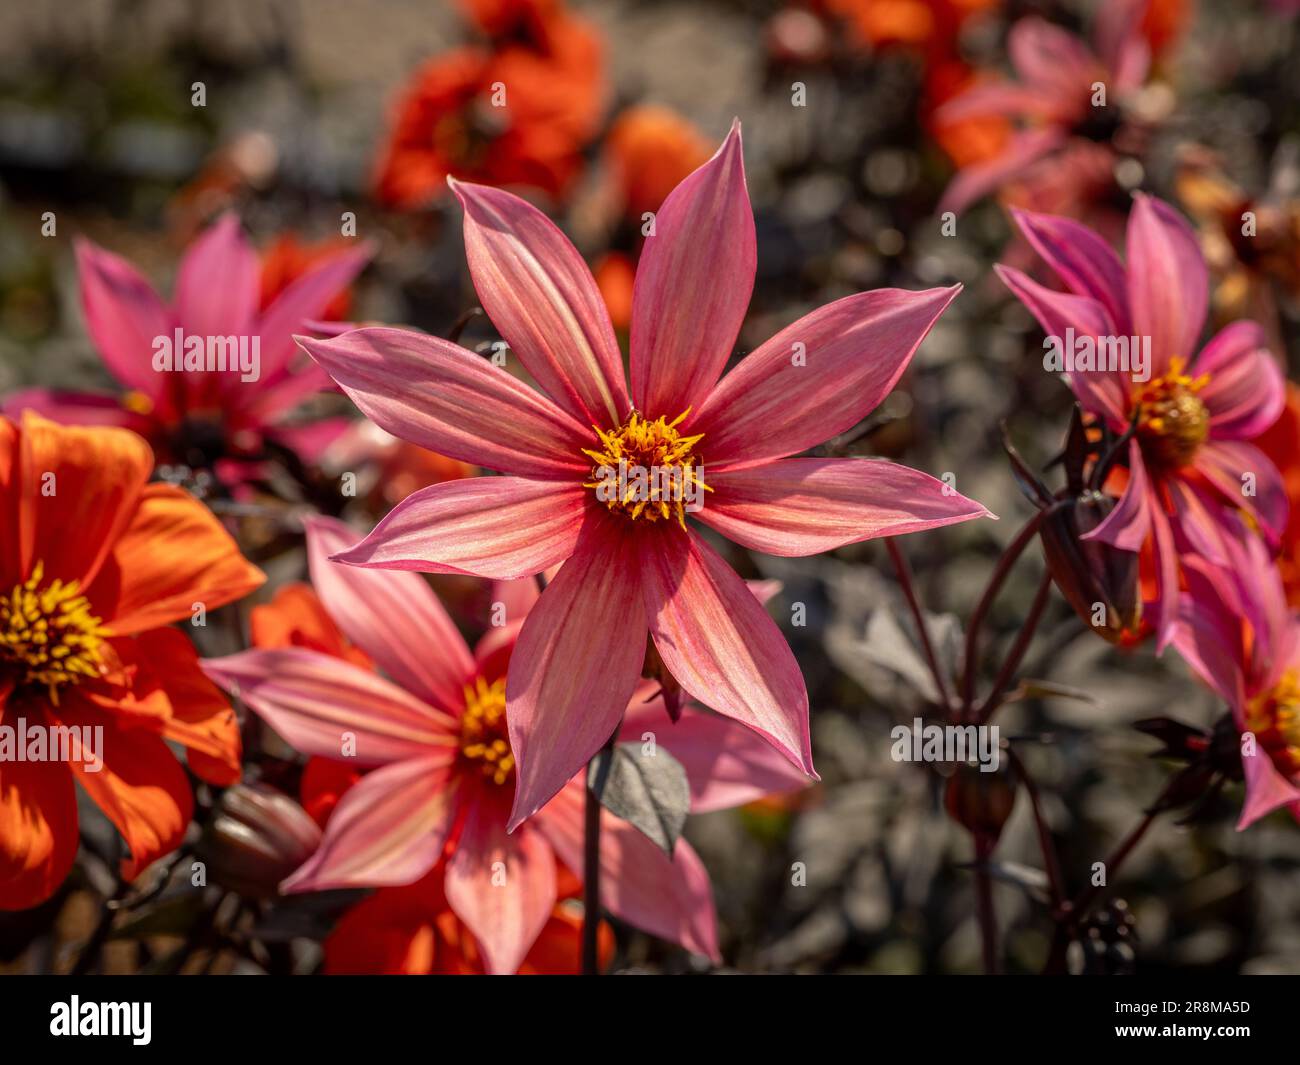 Coral pink flower of Dahlia 'Hawaiian Sunrise' with its bronze stem and foliage growing in a UK garden Stock Photo